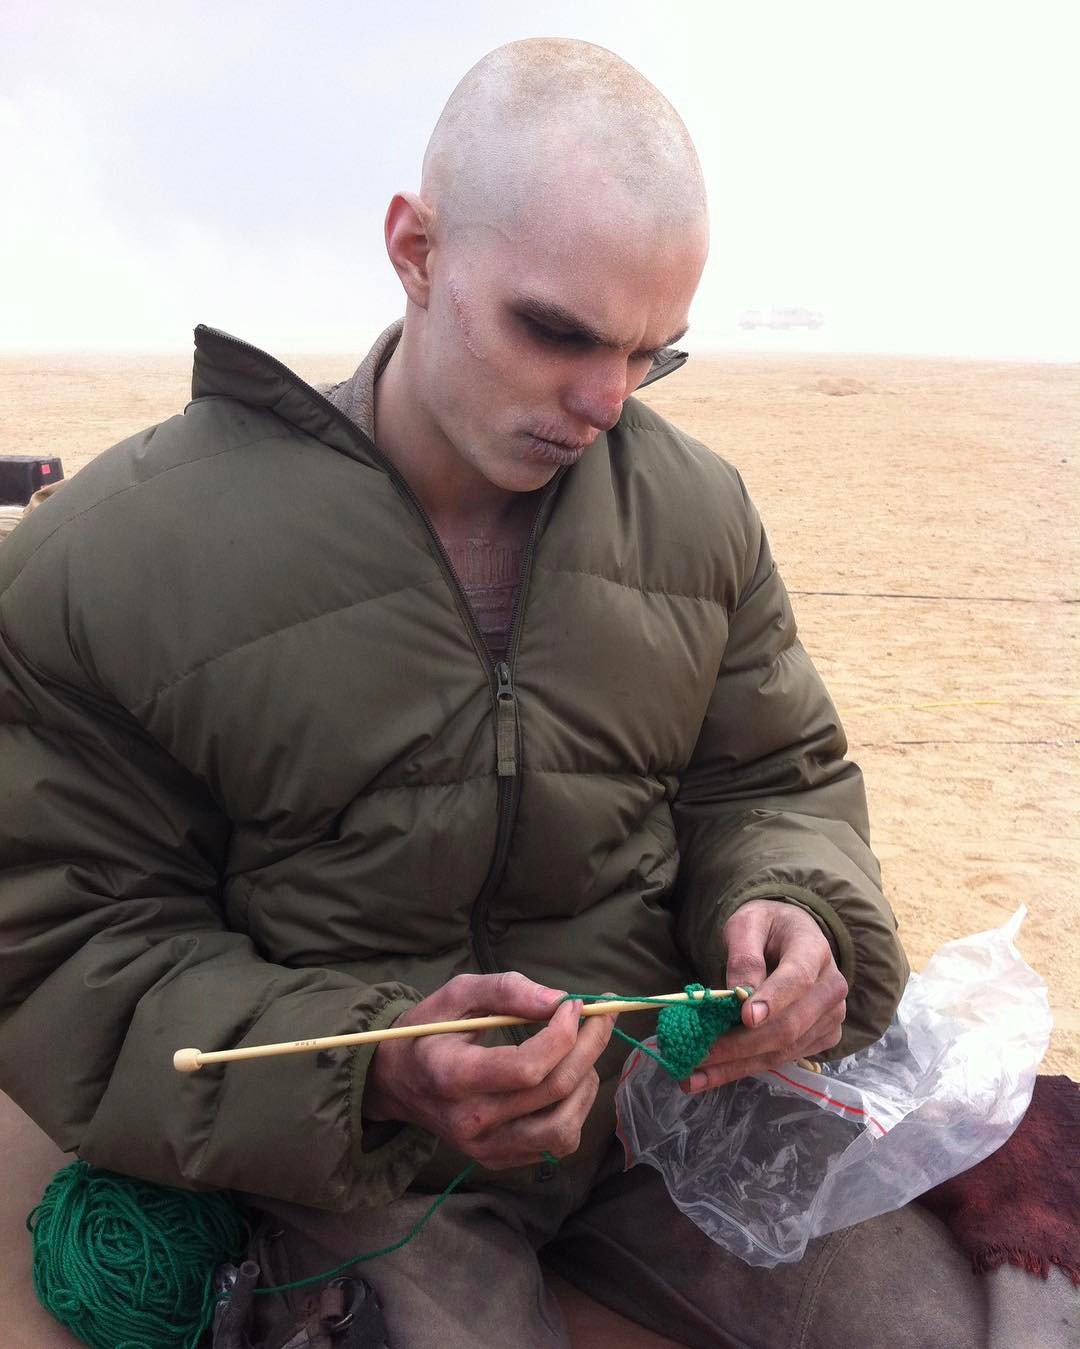 Nicholas Hoult knitting on the set of Mad Max: Fury Road.